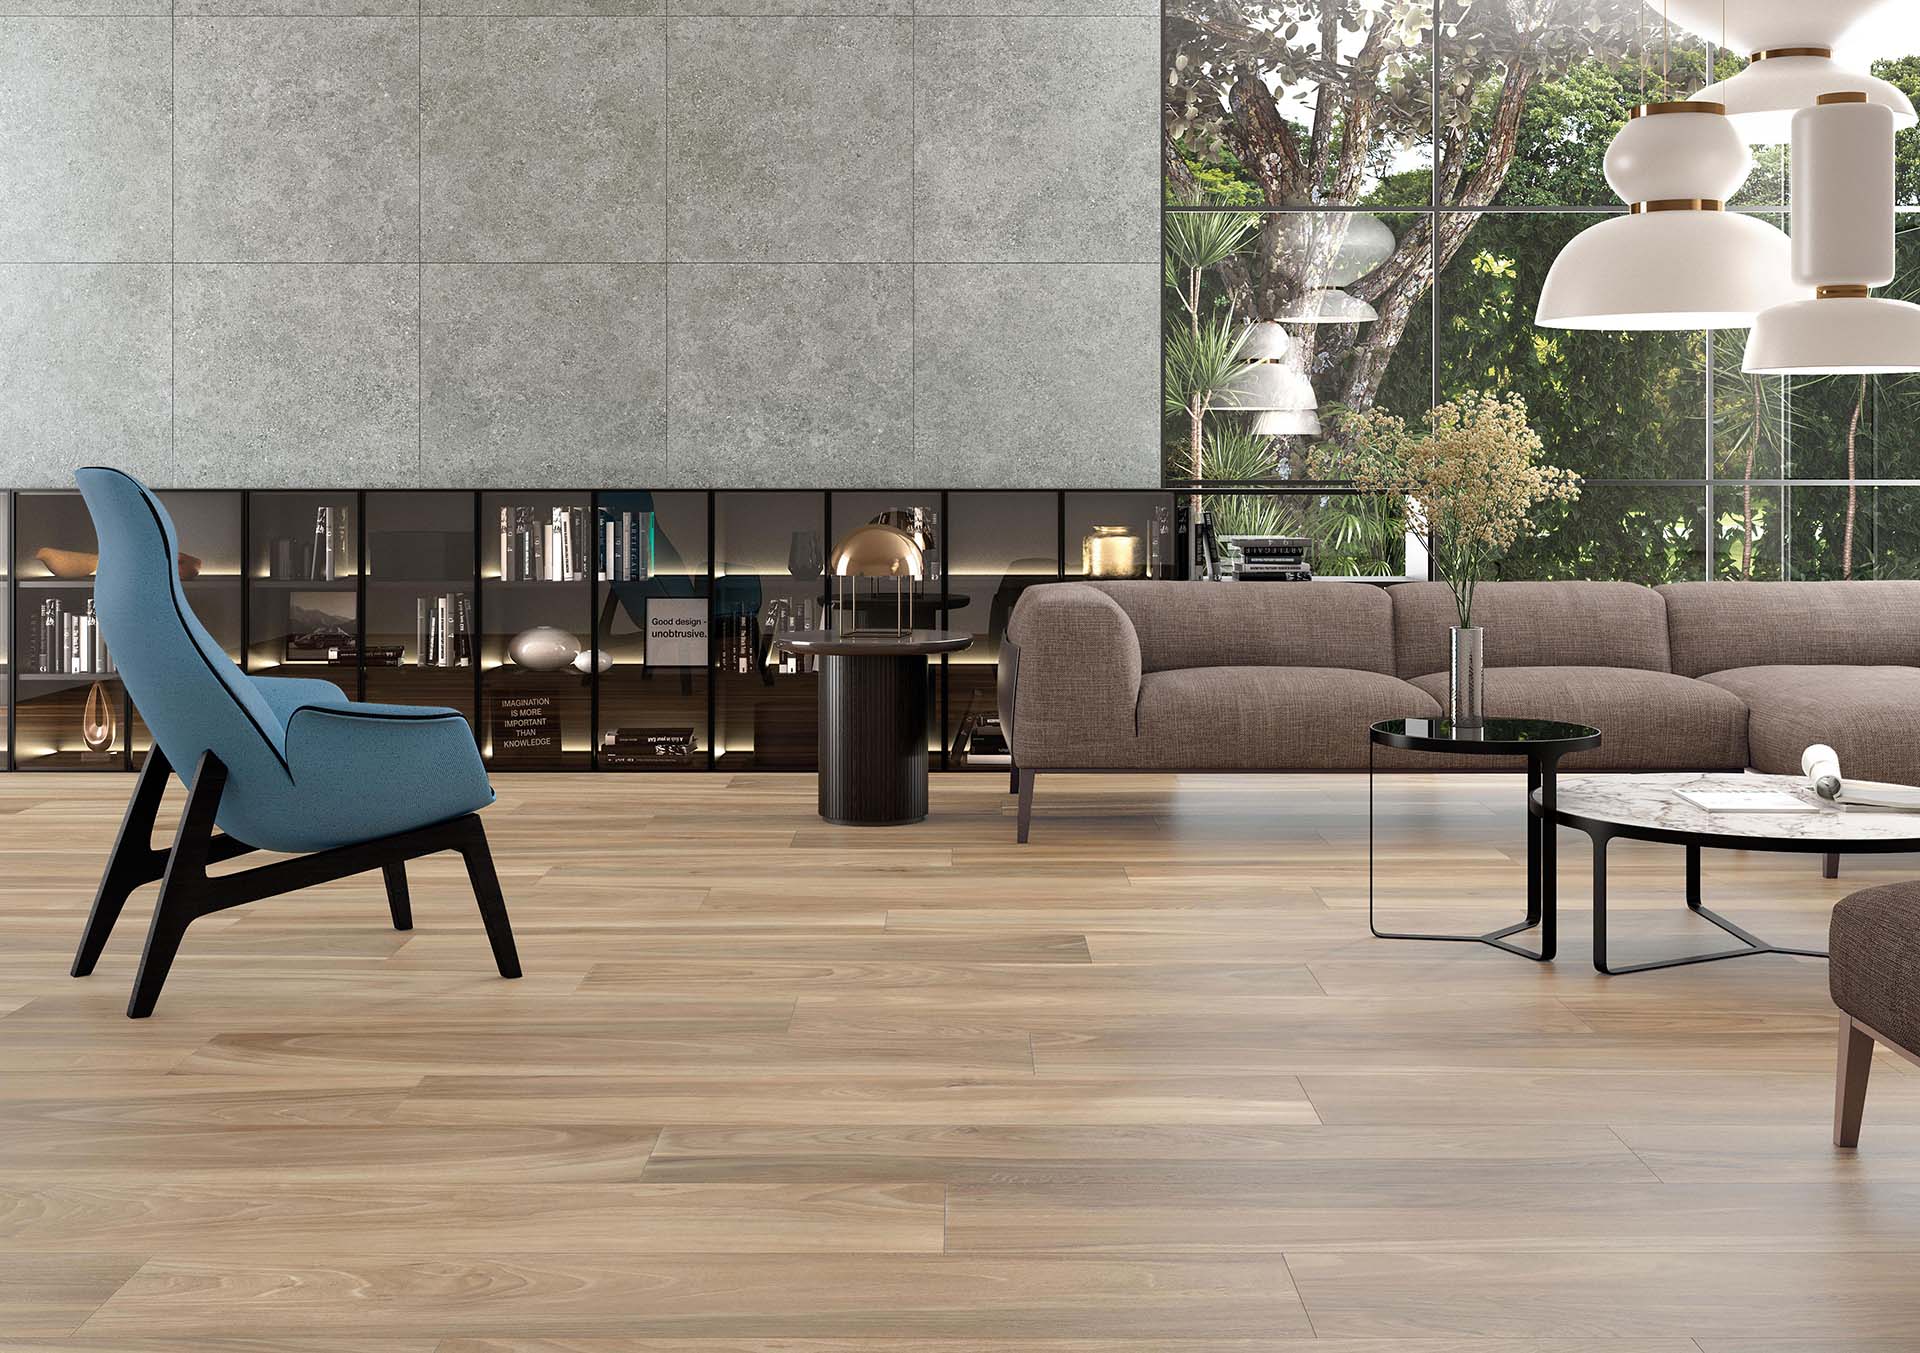 UPTILES - BREST TIMBER TILES COLLECTION BY TAU CERAMICA